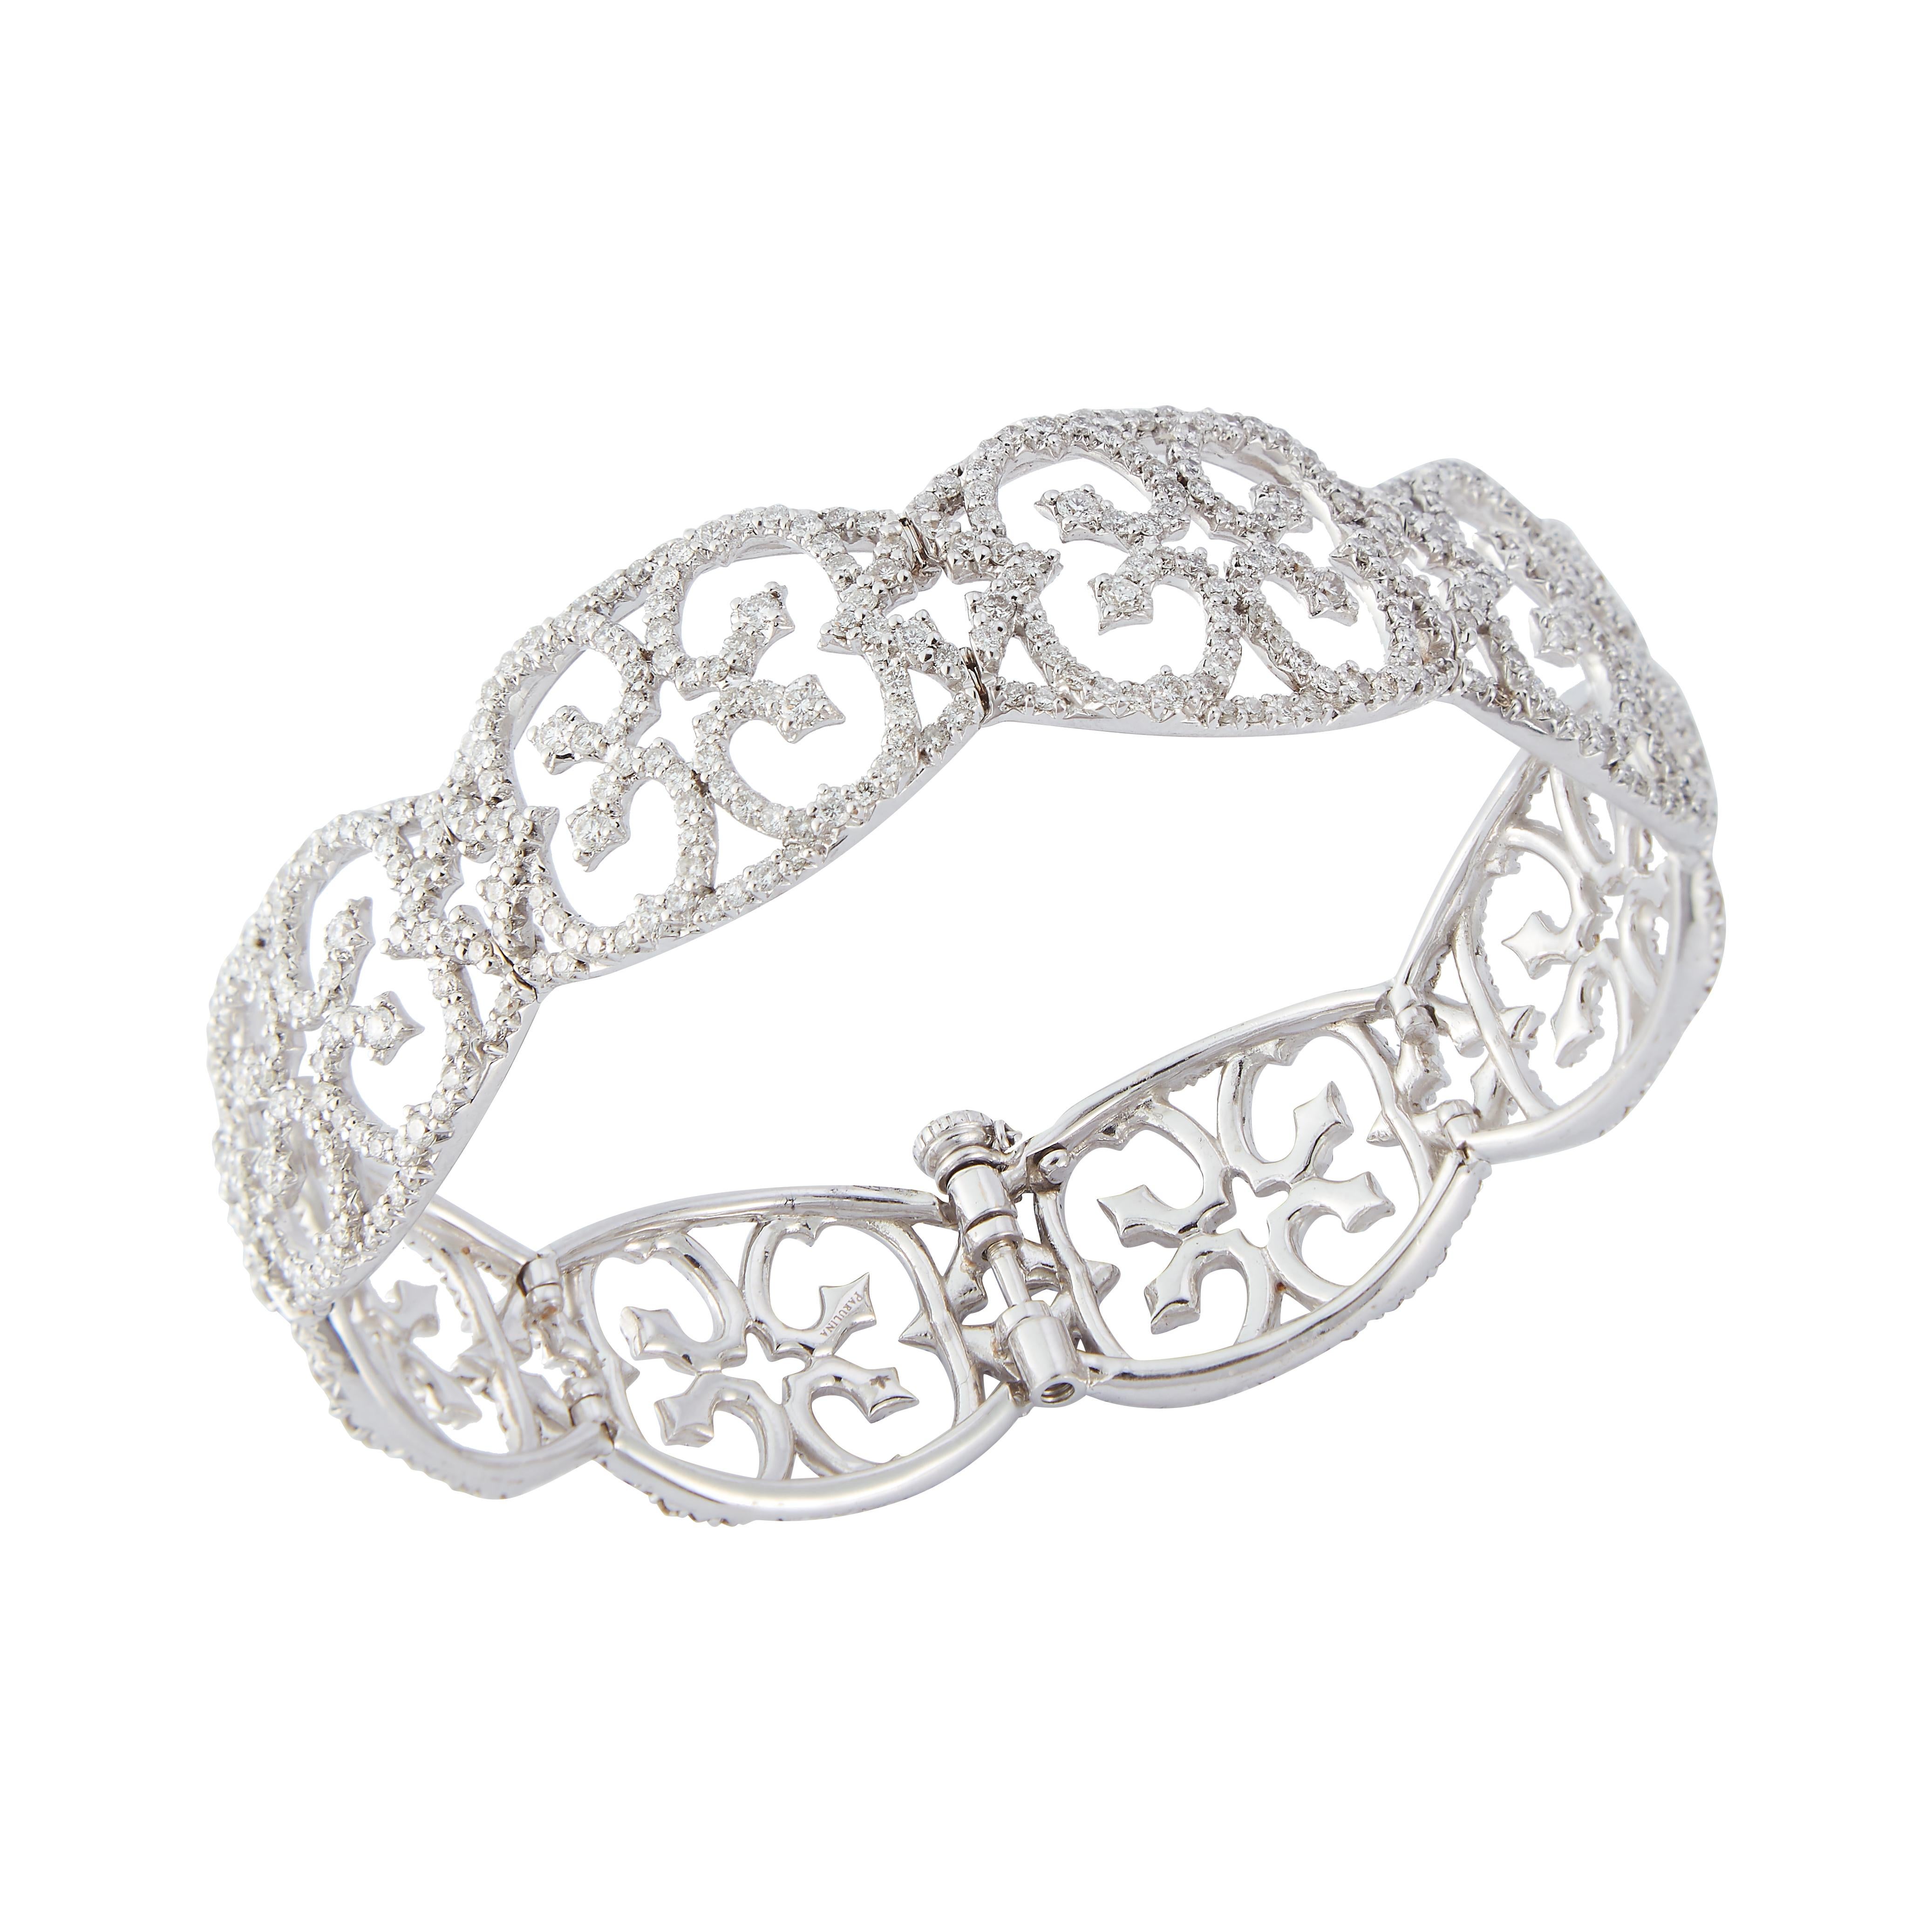 Parulina Couture Fine Jewelry- Diamond Cuff in 18K White Gold. 
Total diamond weight of 8.53ct
Bracelet has a wide opening that will accommodate fitting most wrists.

Metal: 18K White Gold
Carat Weight: 8.53